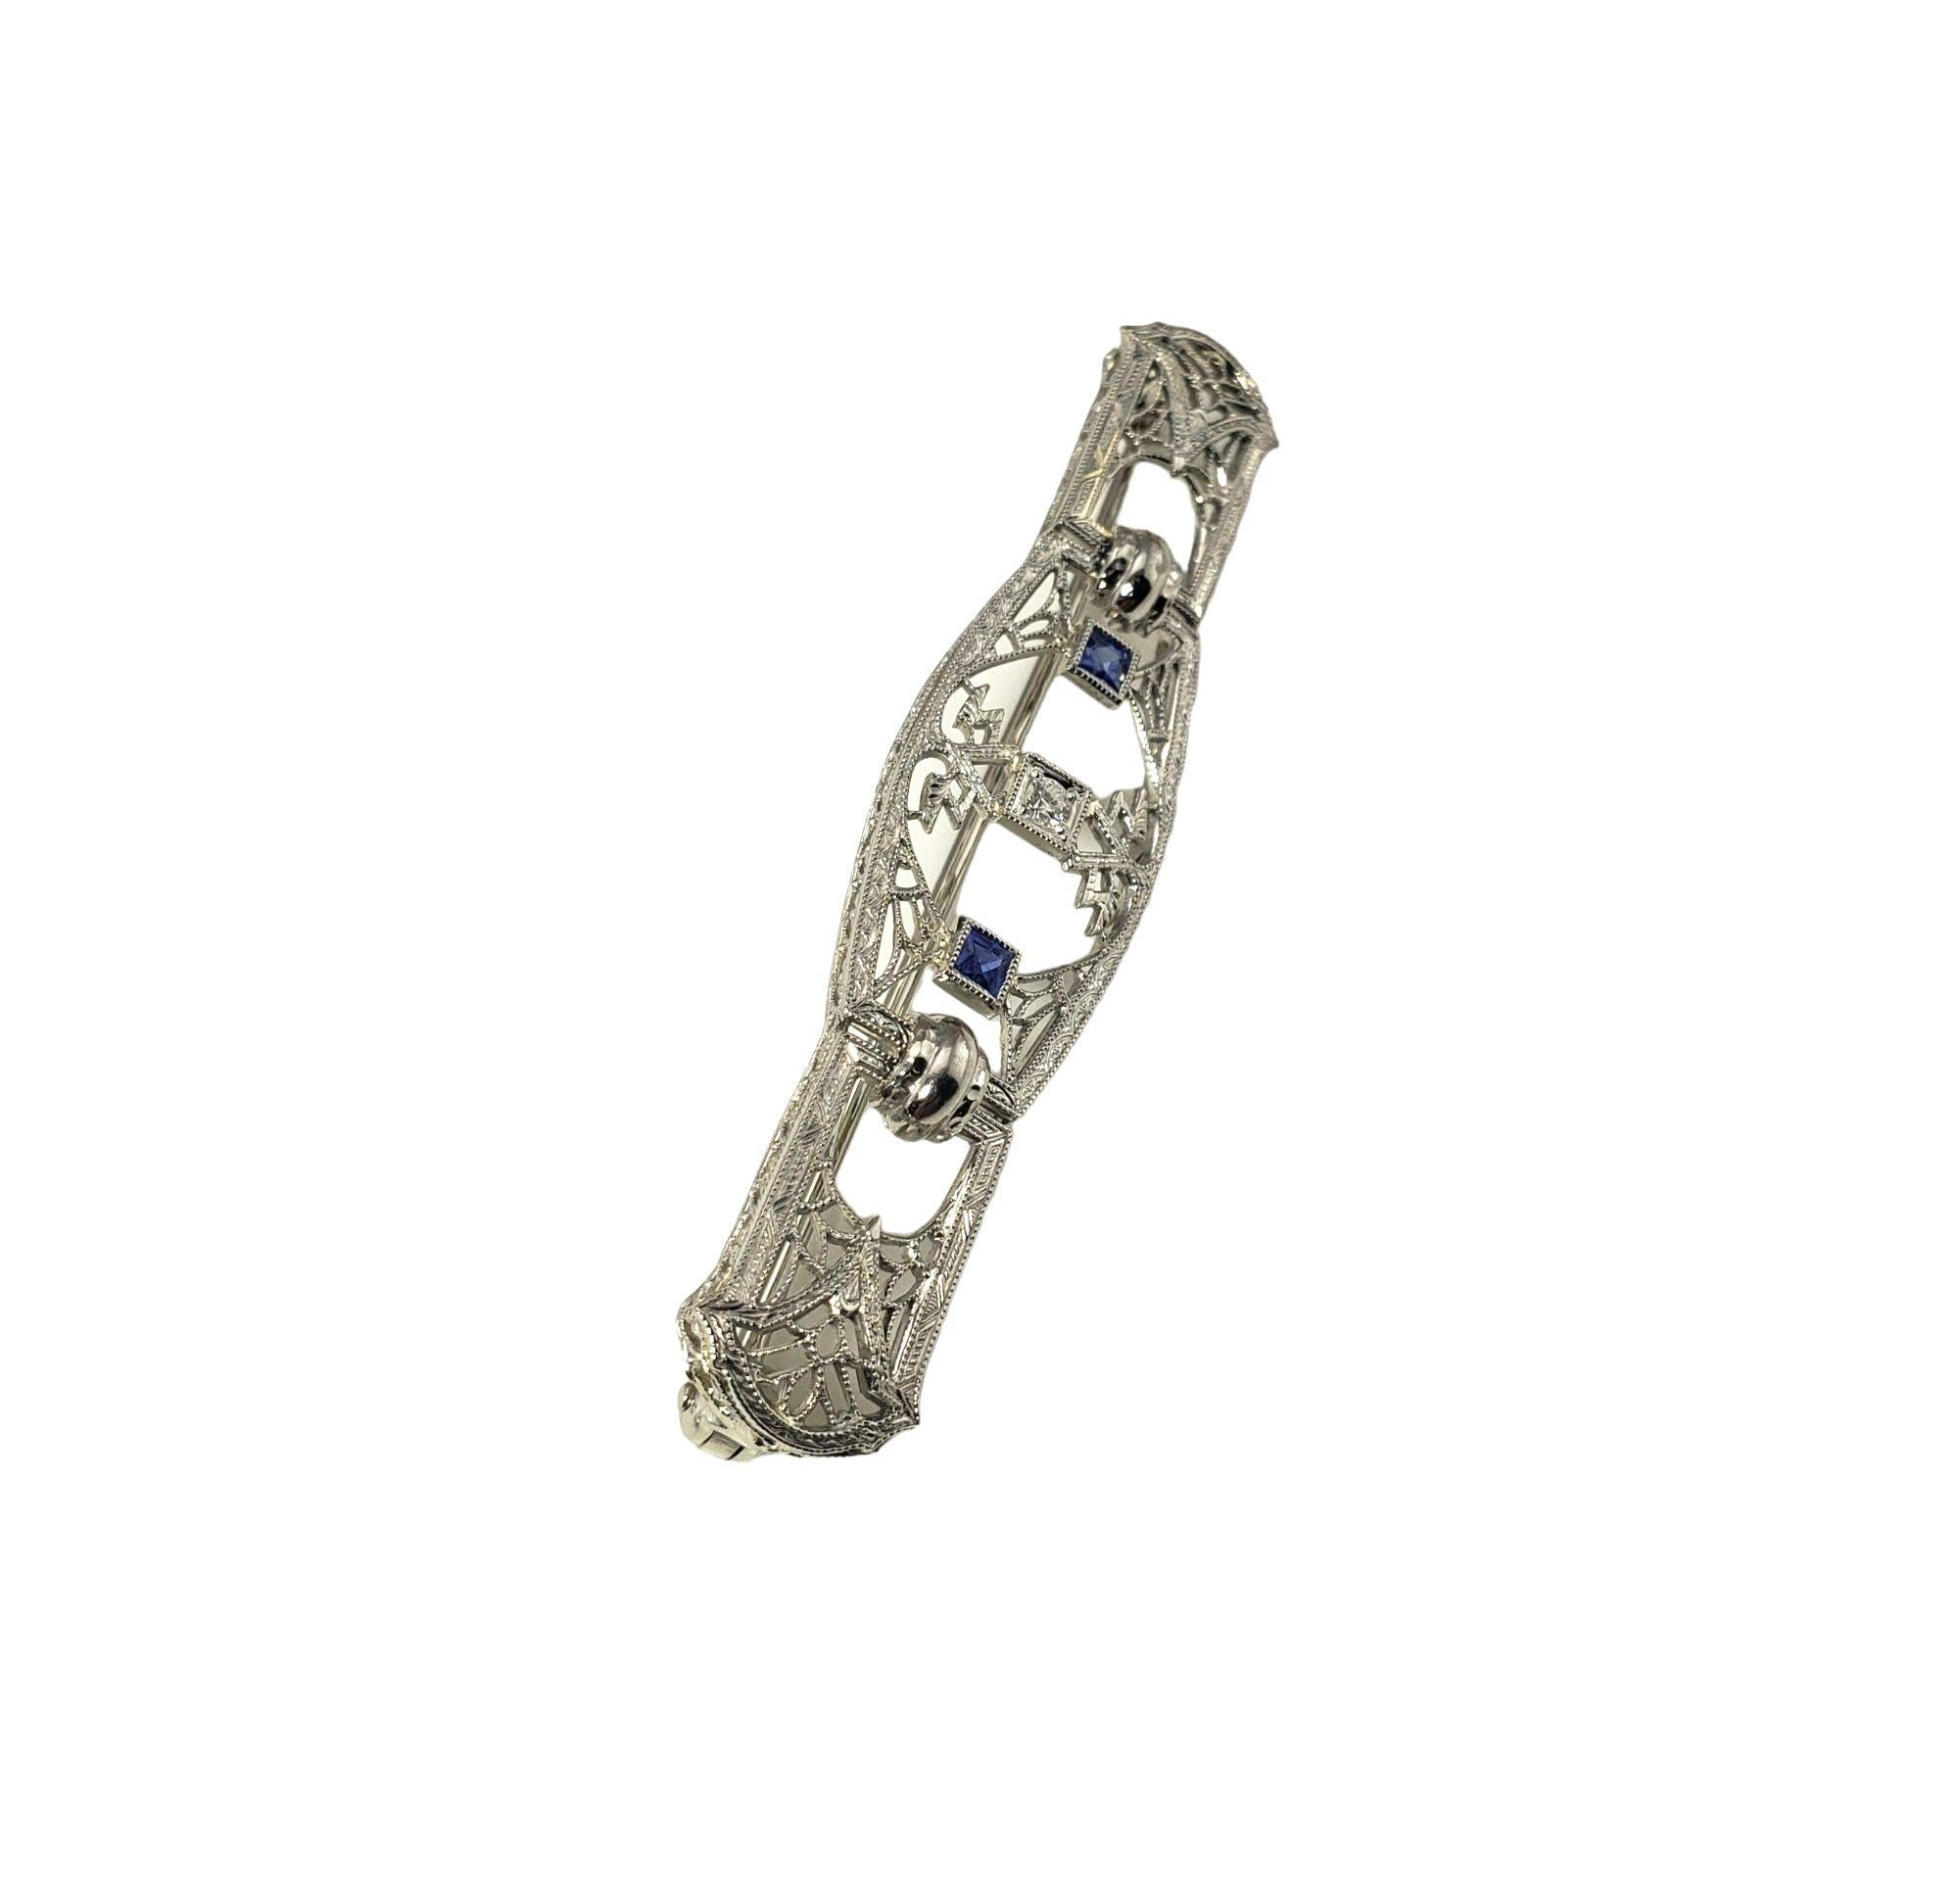 Vintage 14 Karat White Gold Filigree Diamond and Synthetic Sapphire Brooch/Pin-

This stunning brooch features two synthetic sapphires and one round brilliant cut diamonds set in beautifully detailed 14K white gold filigree.

Approximate total